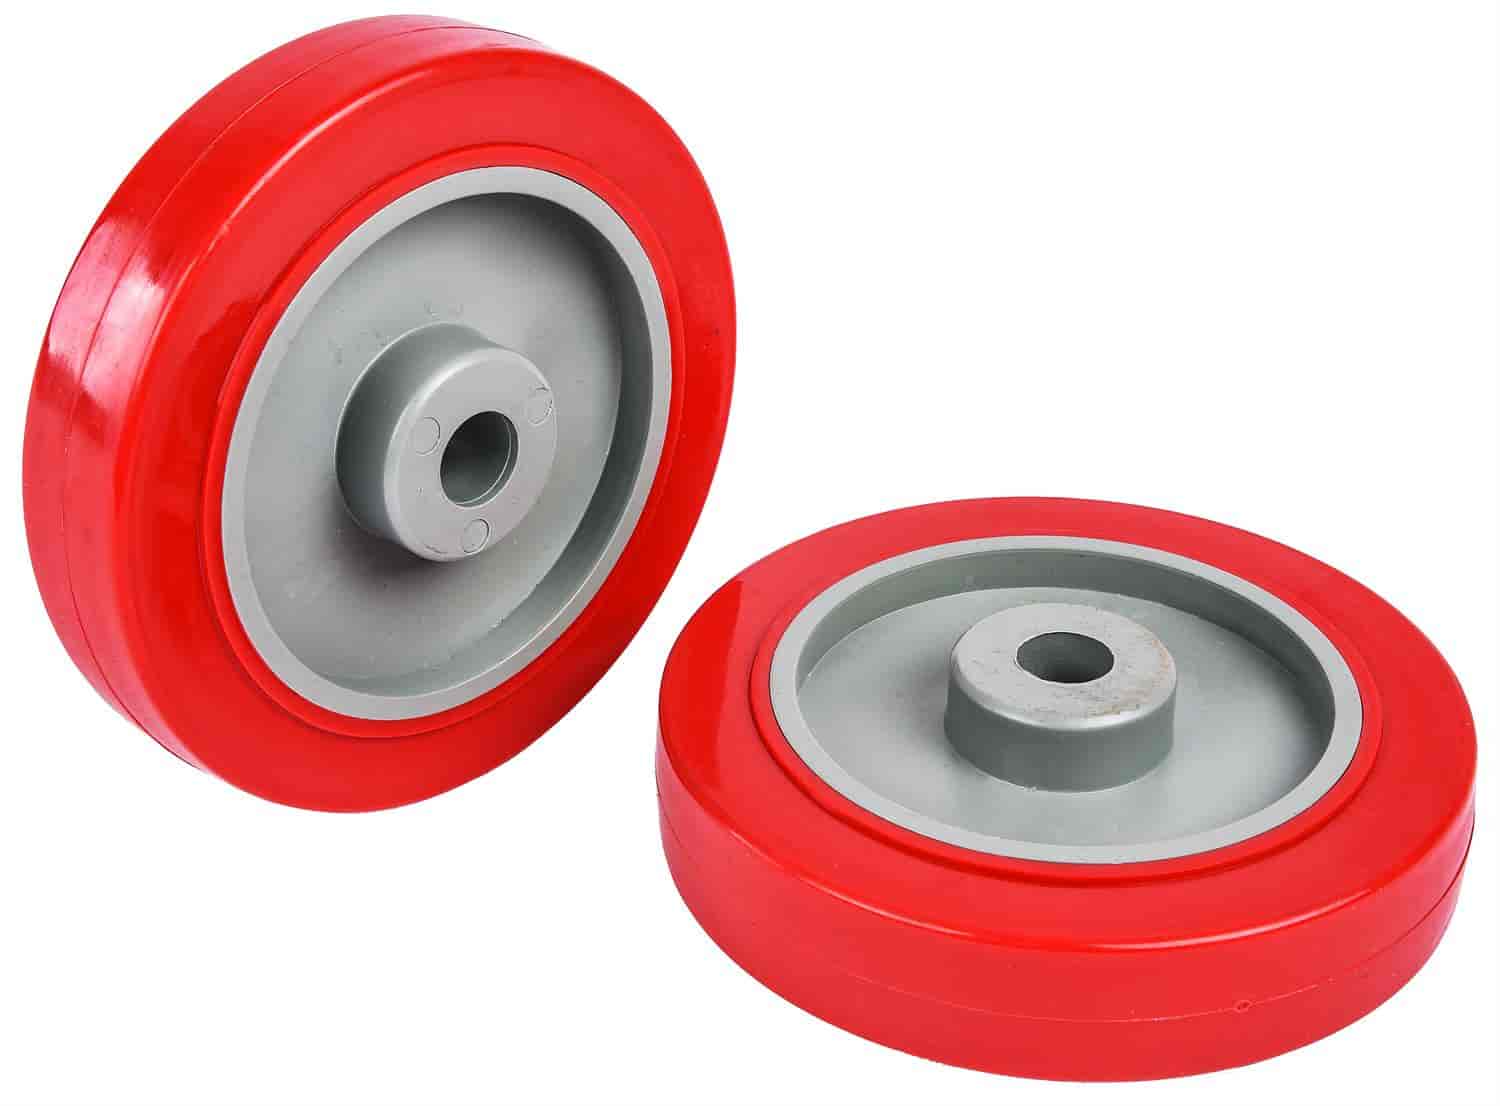 Replacement Rear Wheels for Welding Cart 555-81543 [Set of 2]